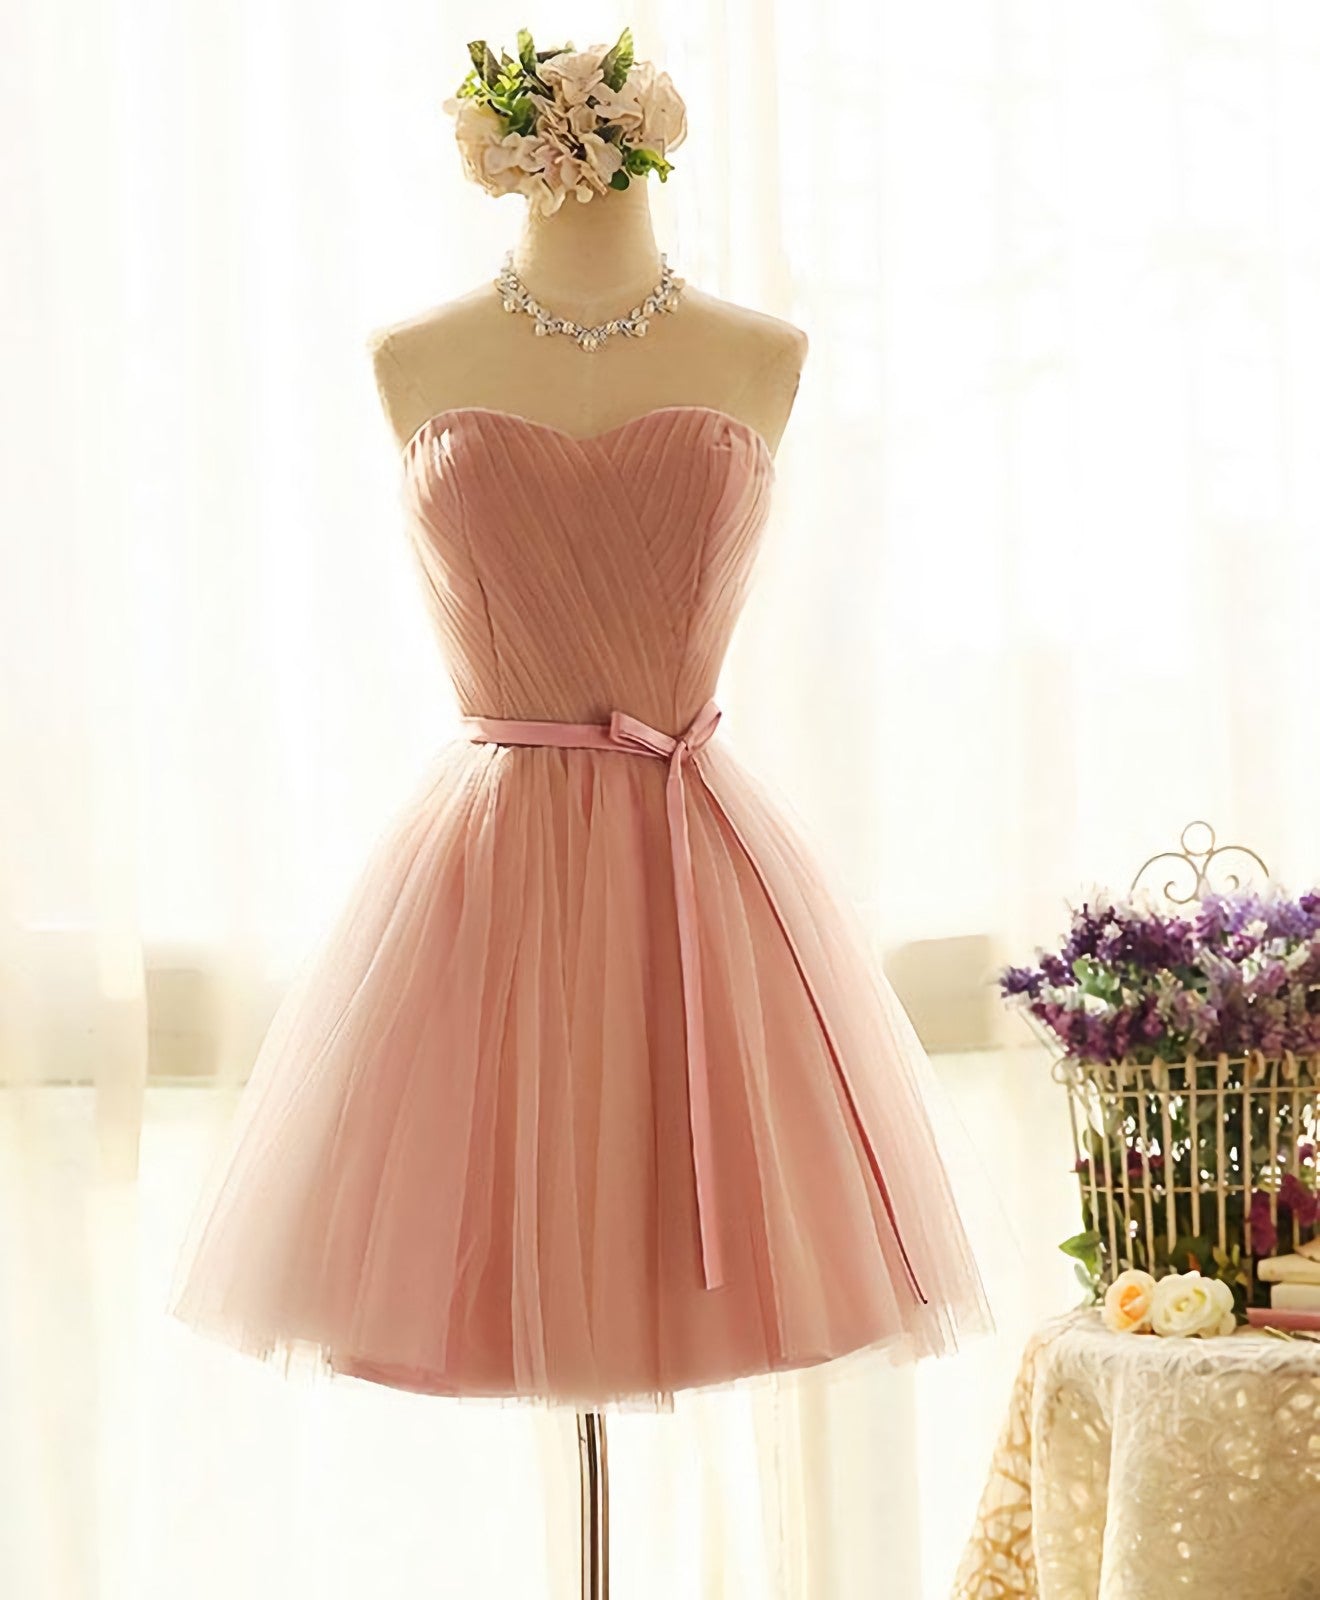 Party Dress Reception Wedding, Cute Sweetheart Neck Tulle Short Prom Dress, Bridesmaid Dress